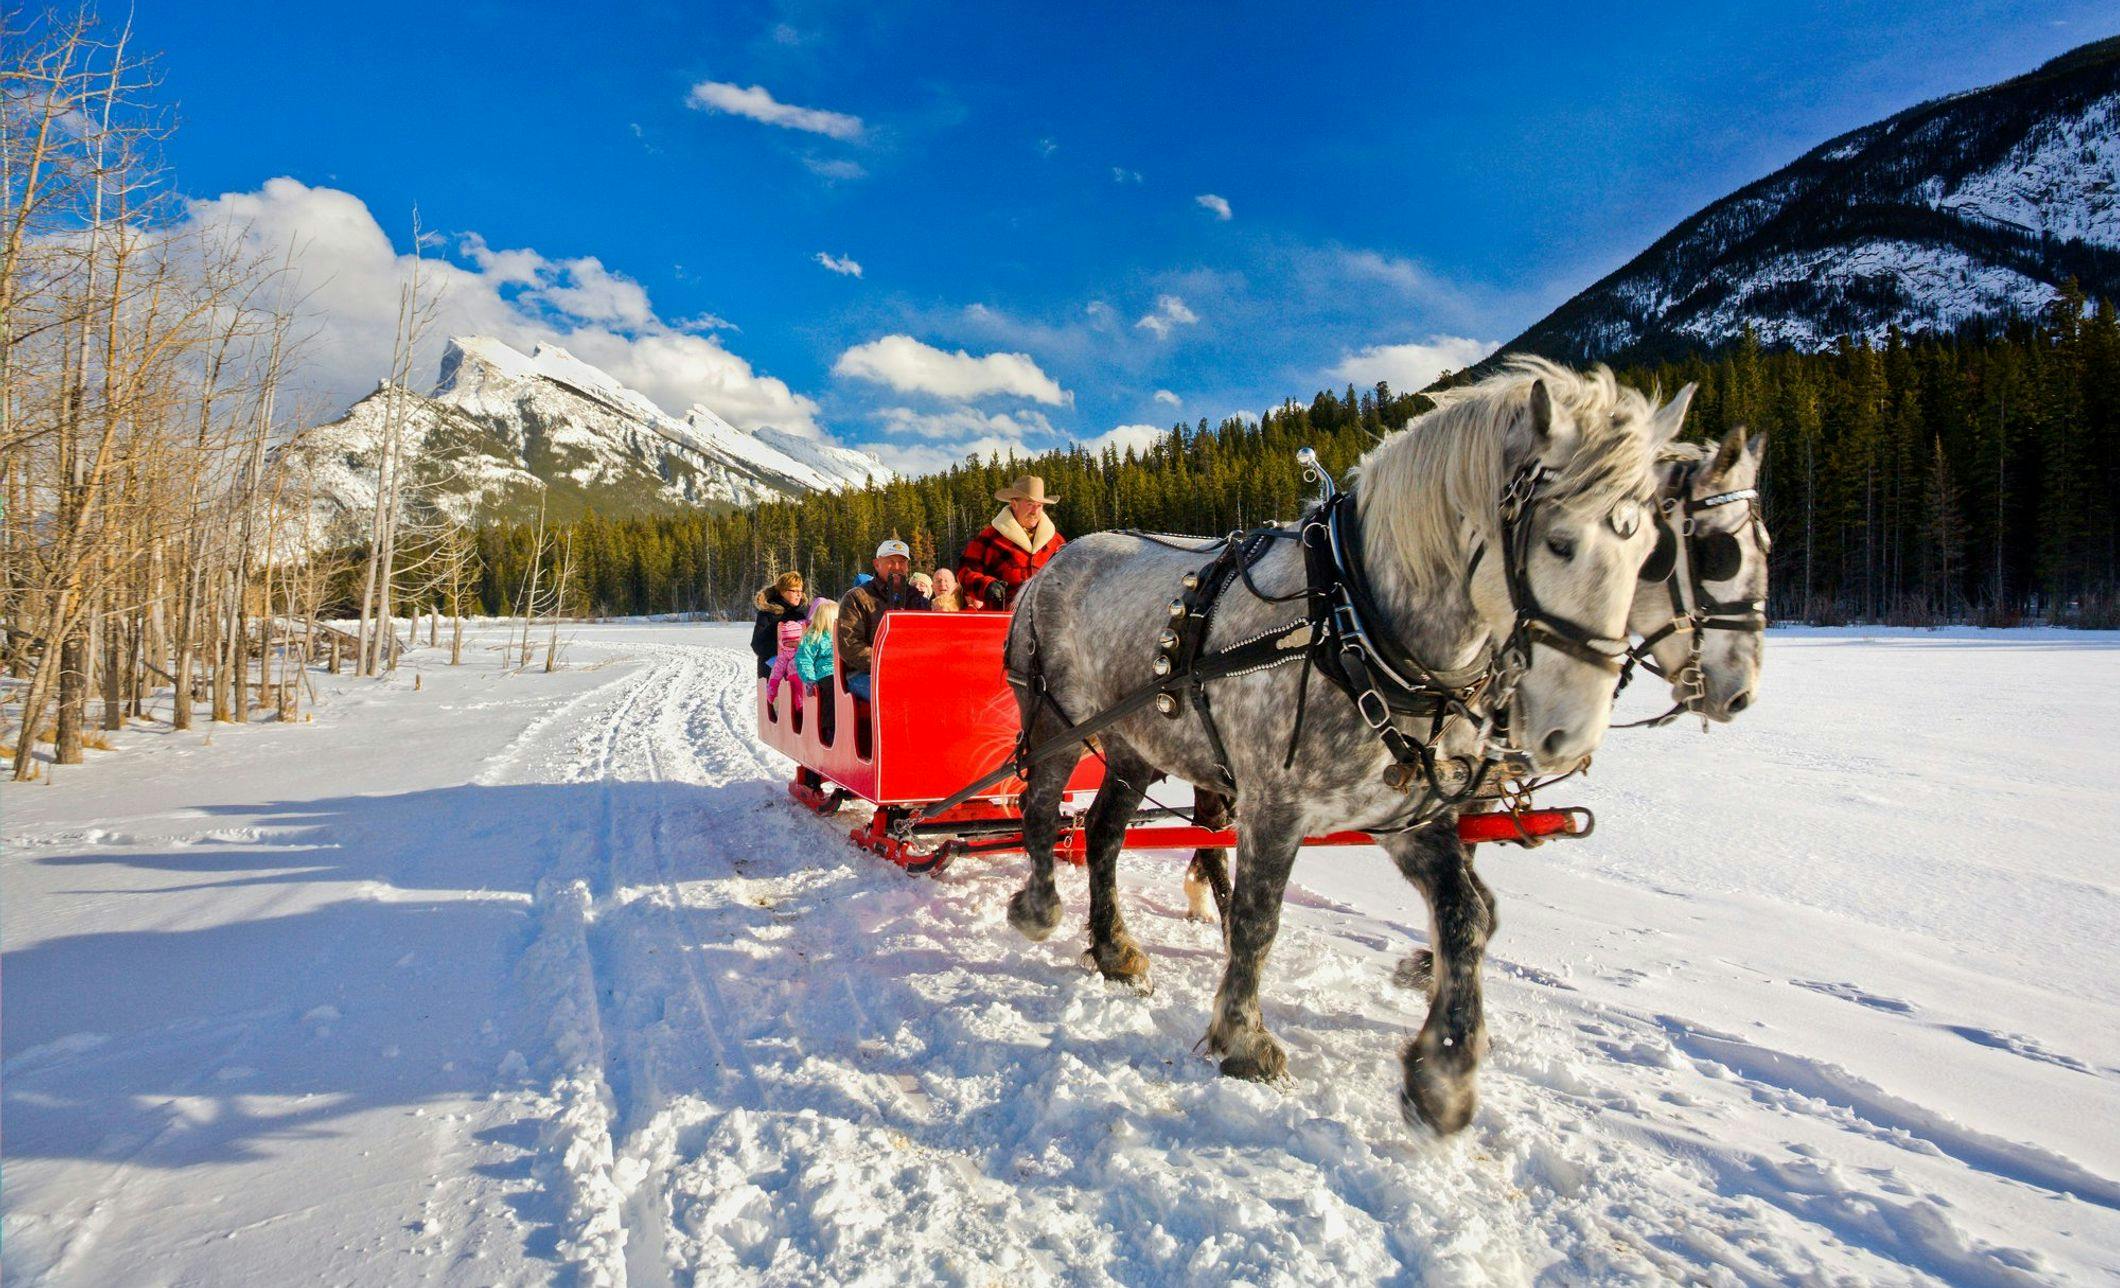 A horse drawn sleigh ride traveling through a snowy landscape with mountains in the background